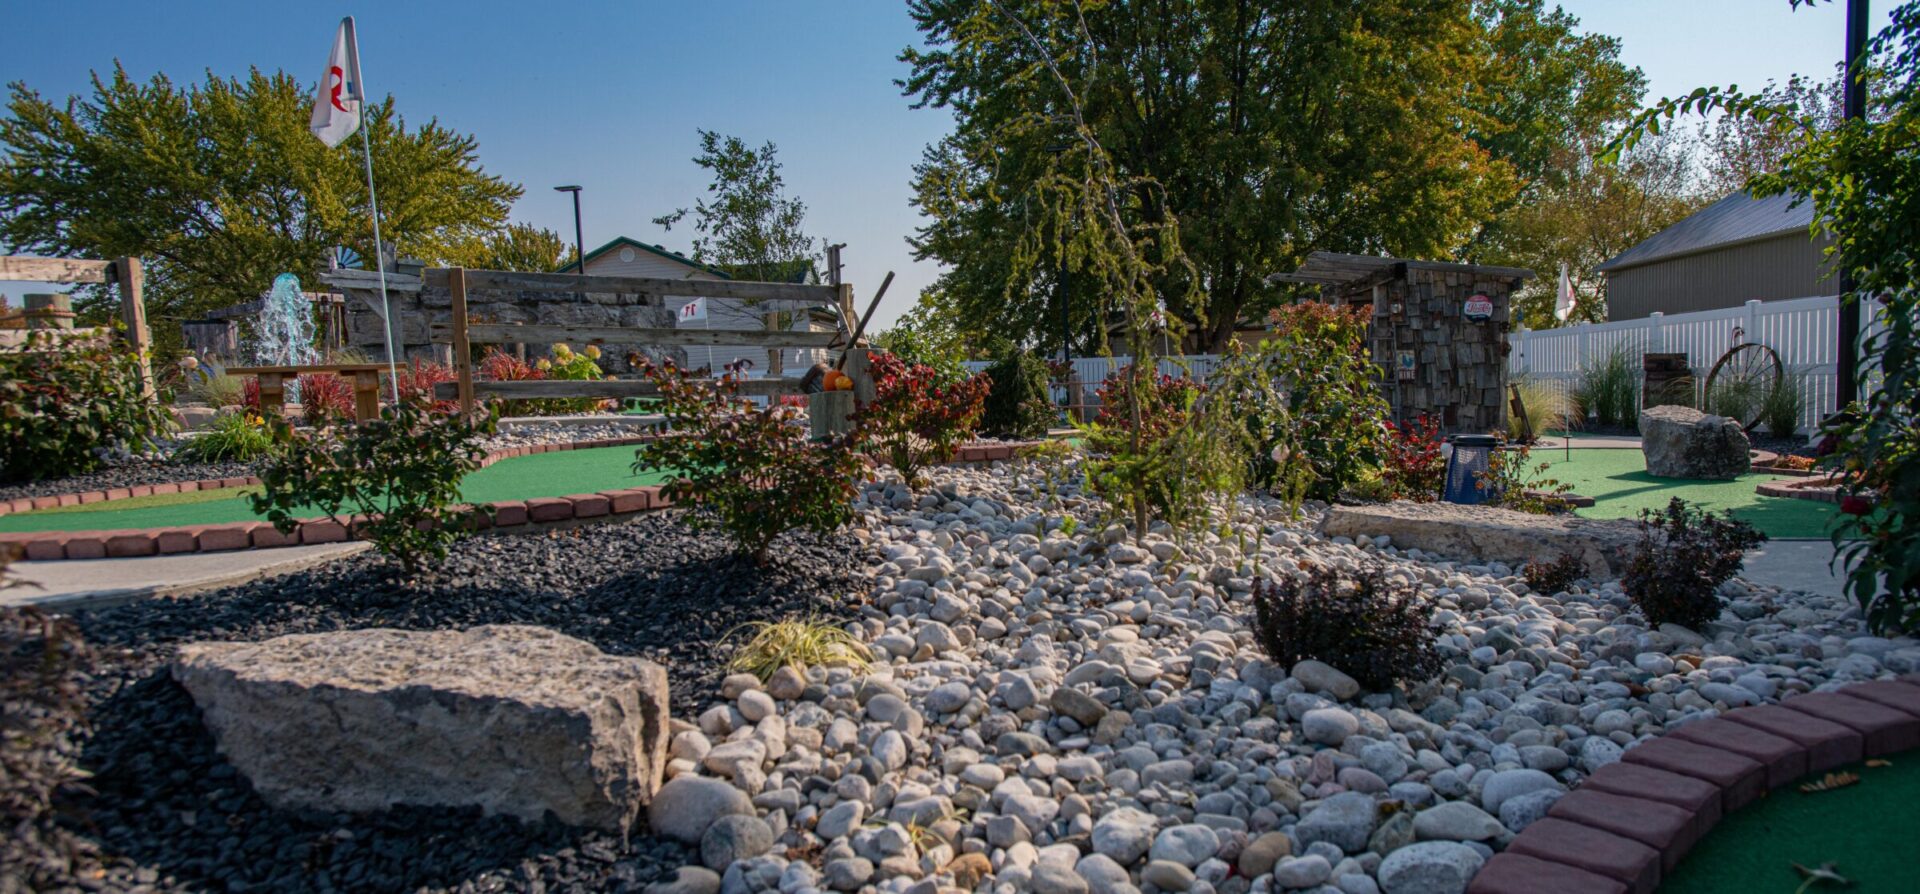 An outdoor miniature golf course featuring green turf, decorative rocks, plants, a small fountain, and a clear blue sky above.